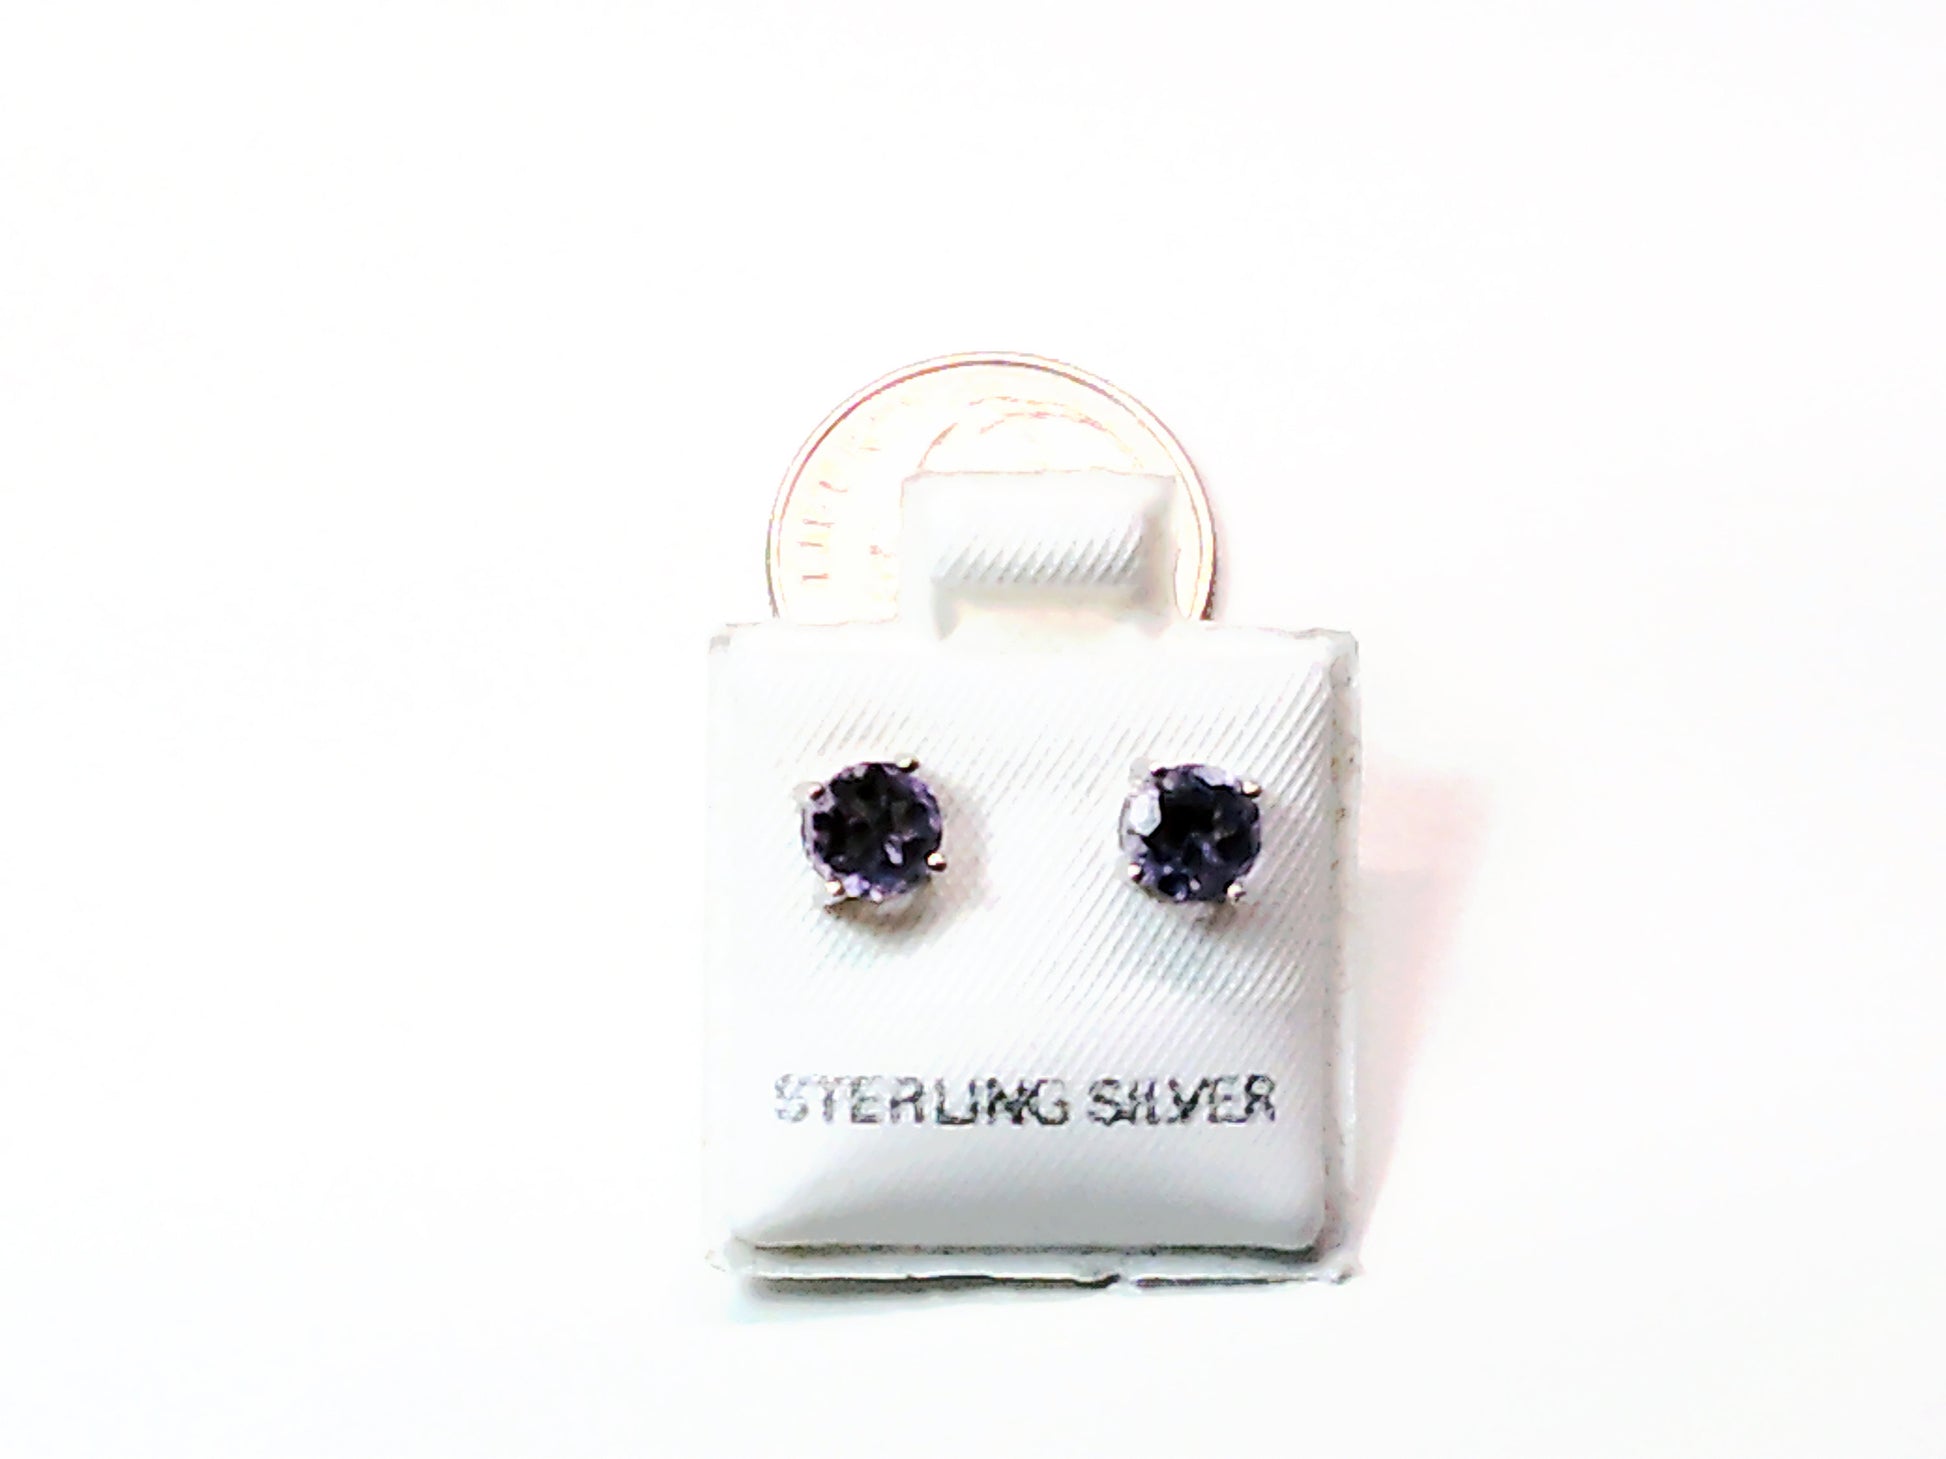 Birthstone genuine stones set in .925 silver stud earring - Providence silver gold jewelry usa